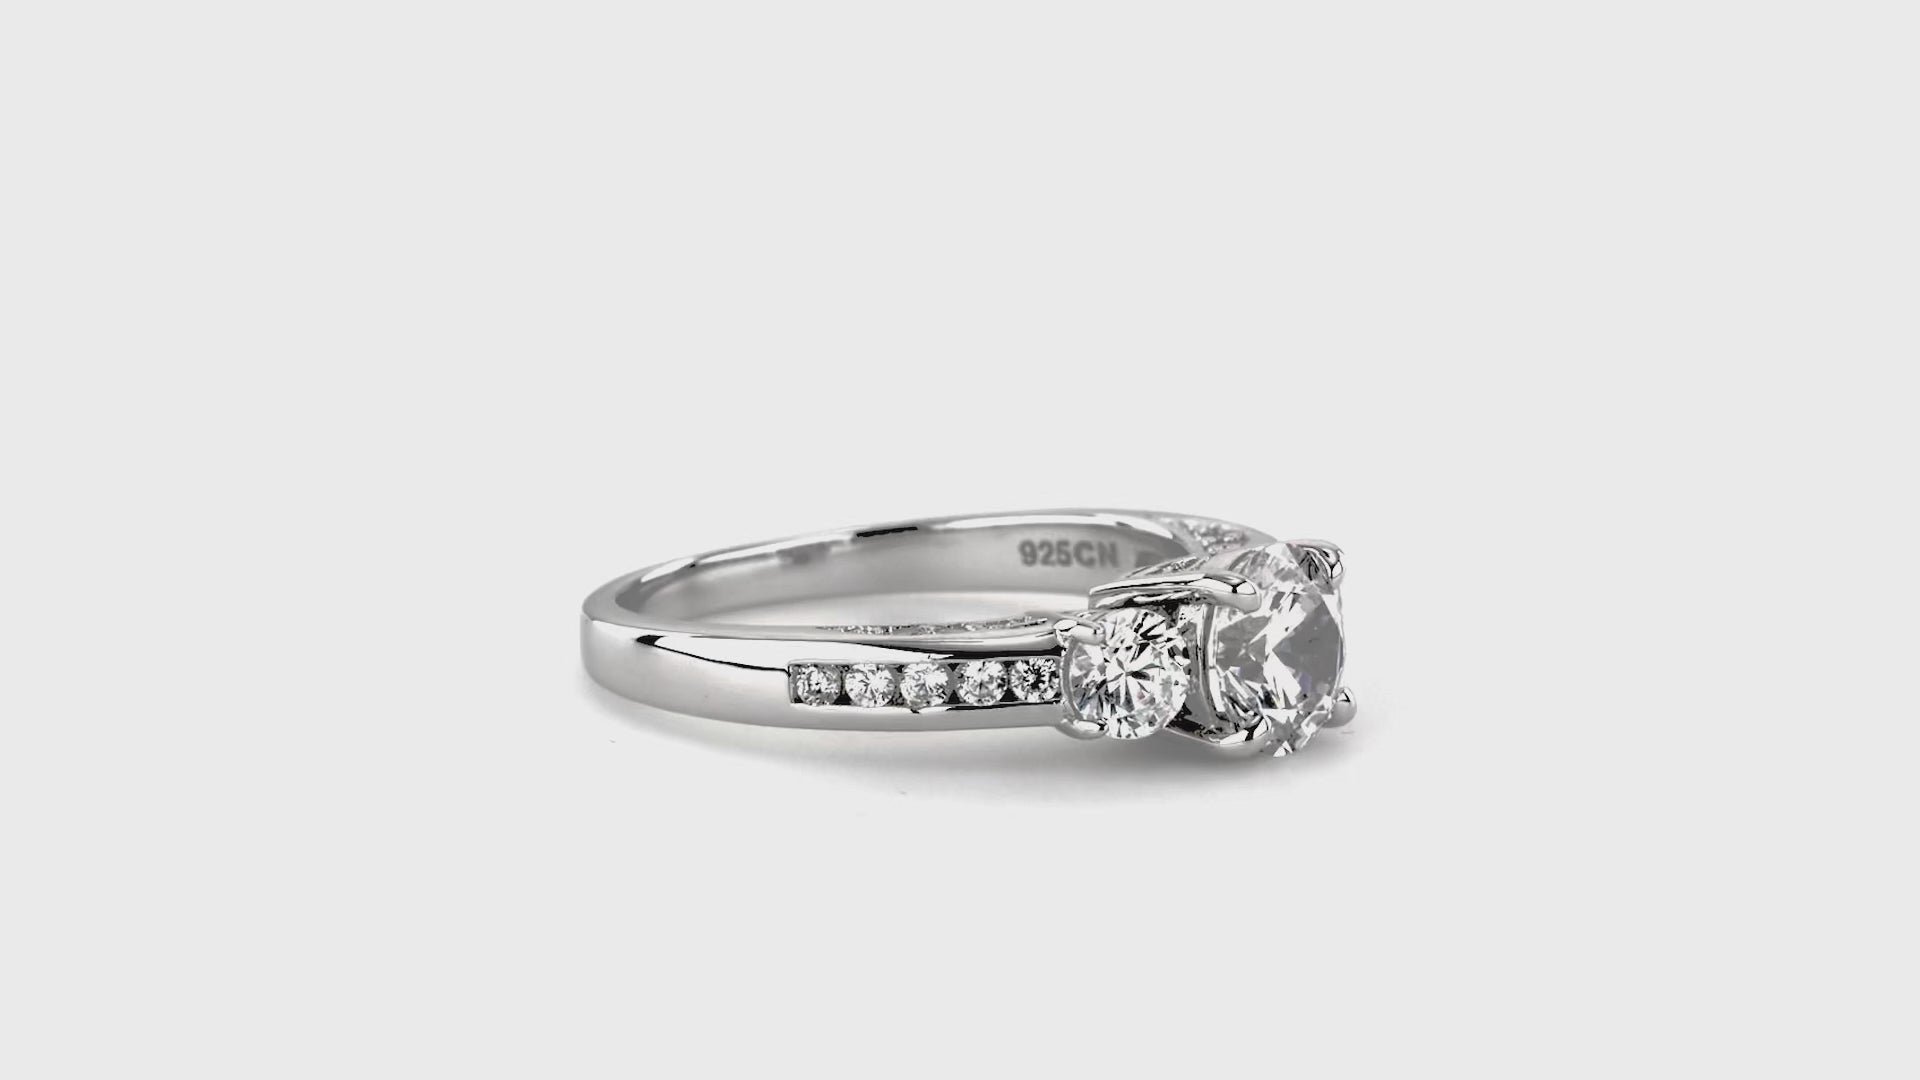 Video Contains 3-Stone Round CZ Ring Set in Sterling Silver. Style Number VR453-01